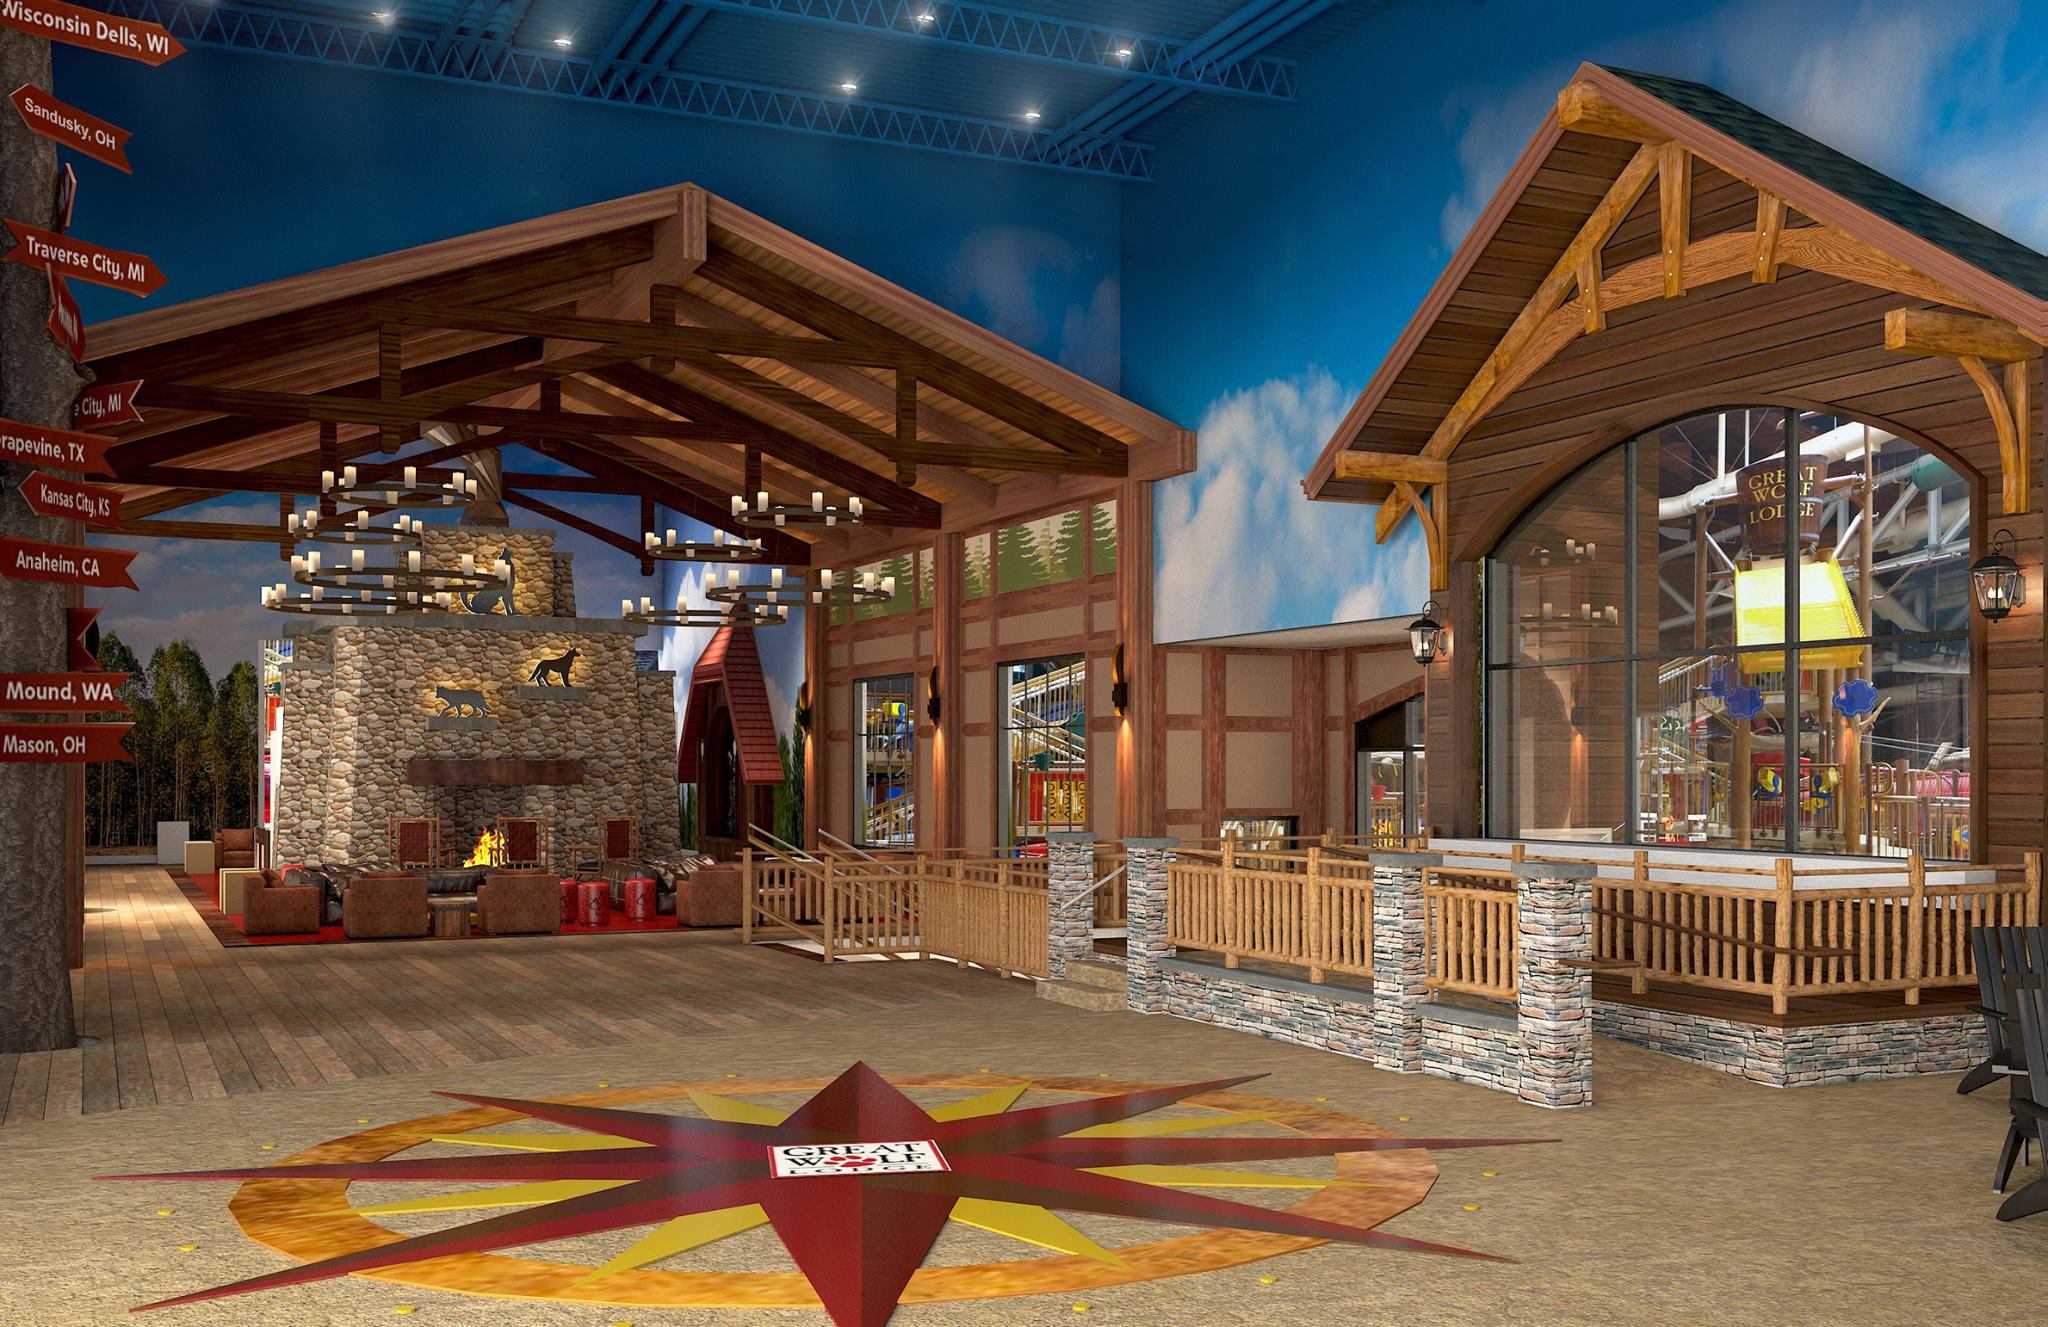 Top 10 of 2018: #3 Opening of Great Wolf Lodge